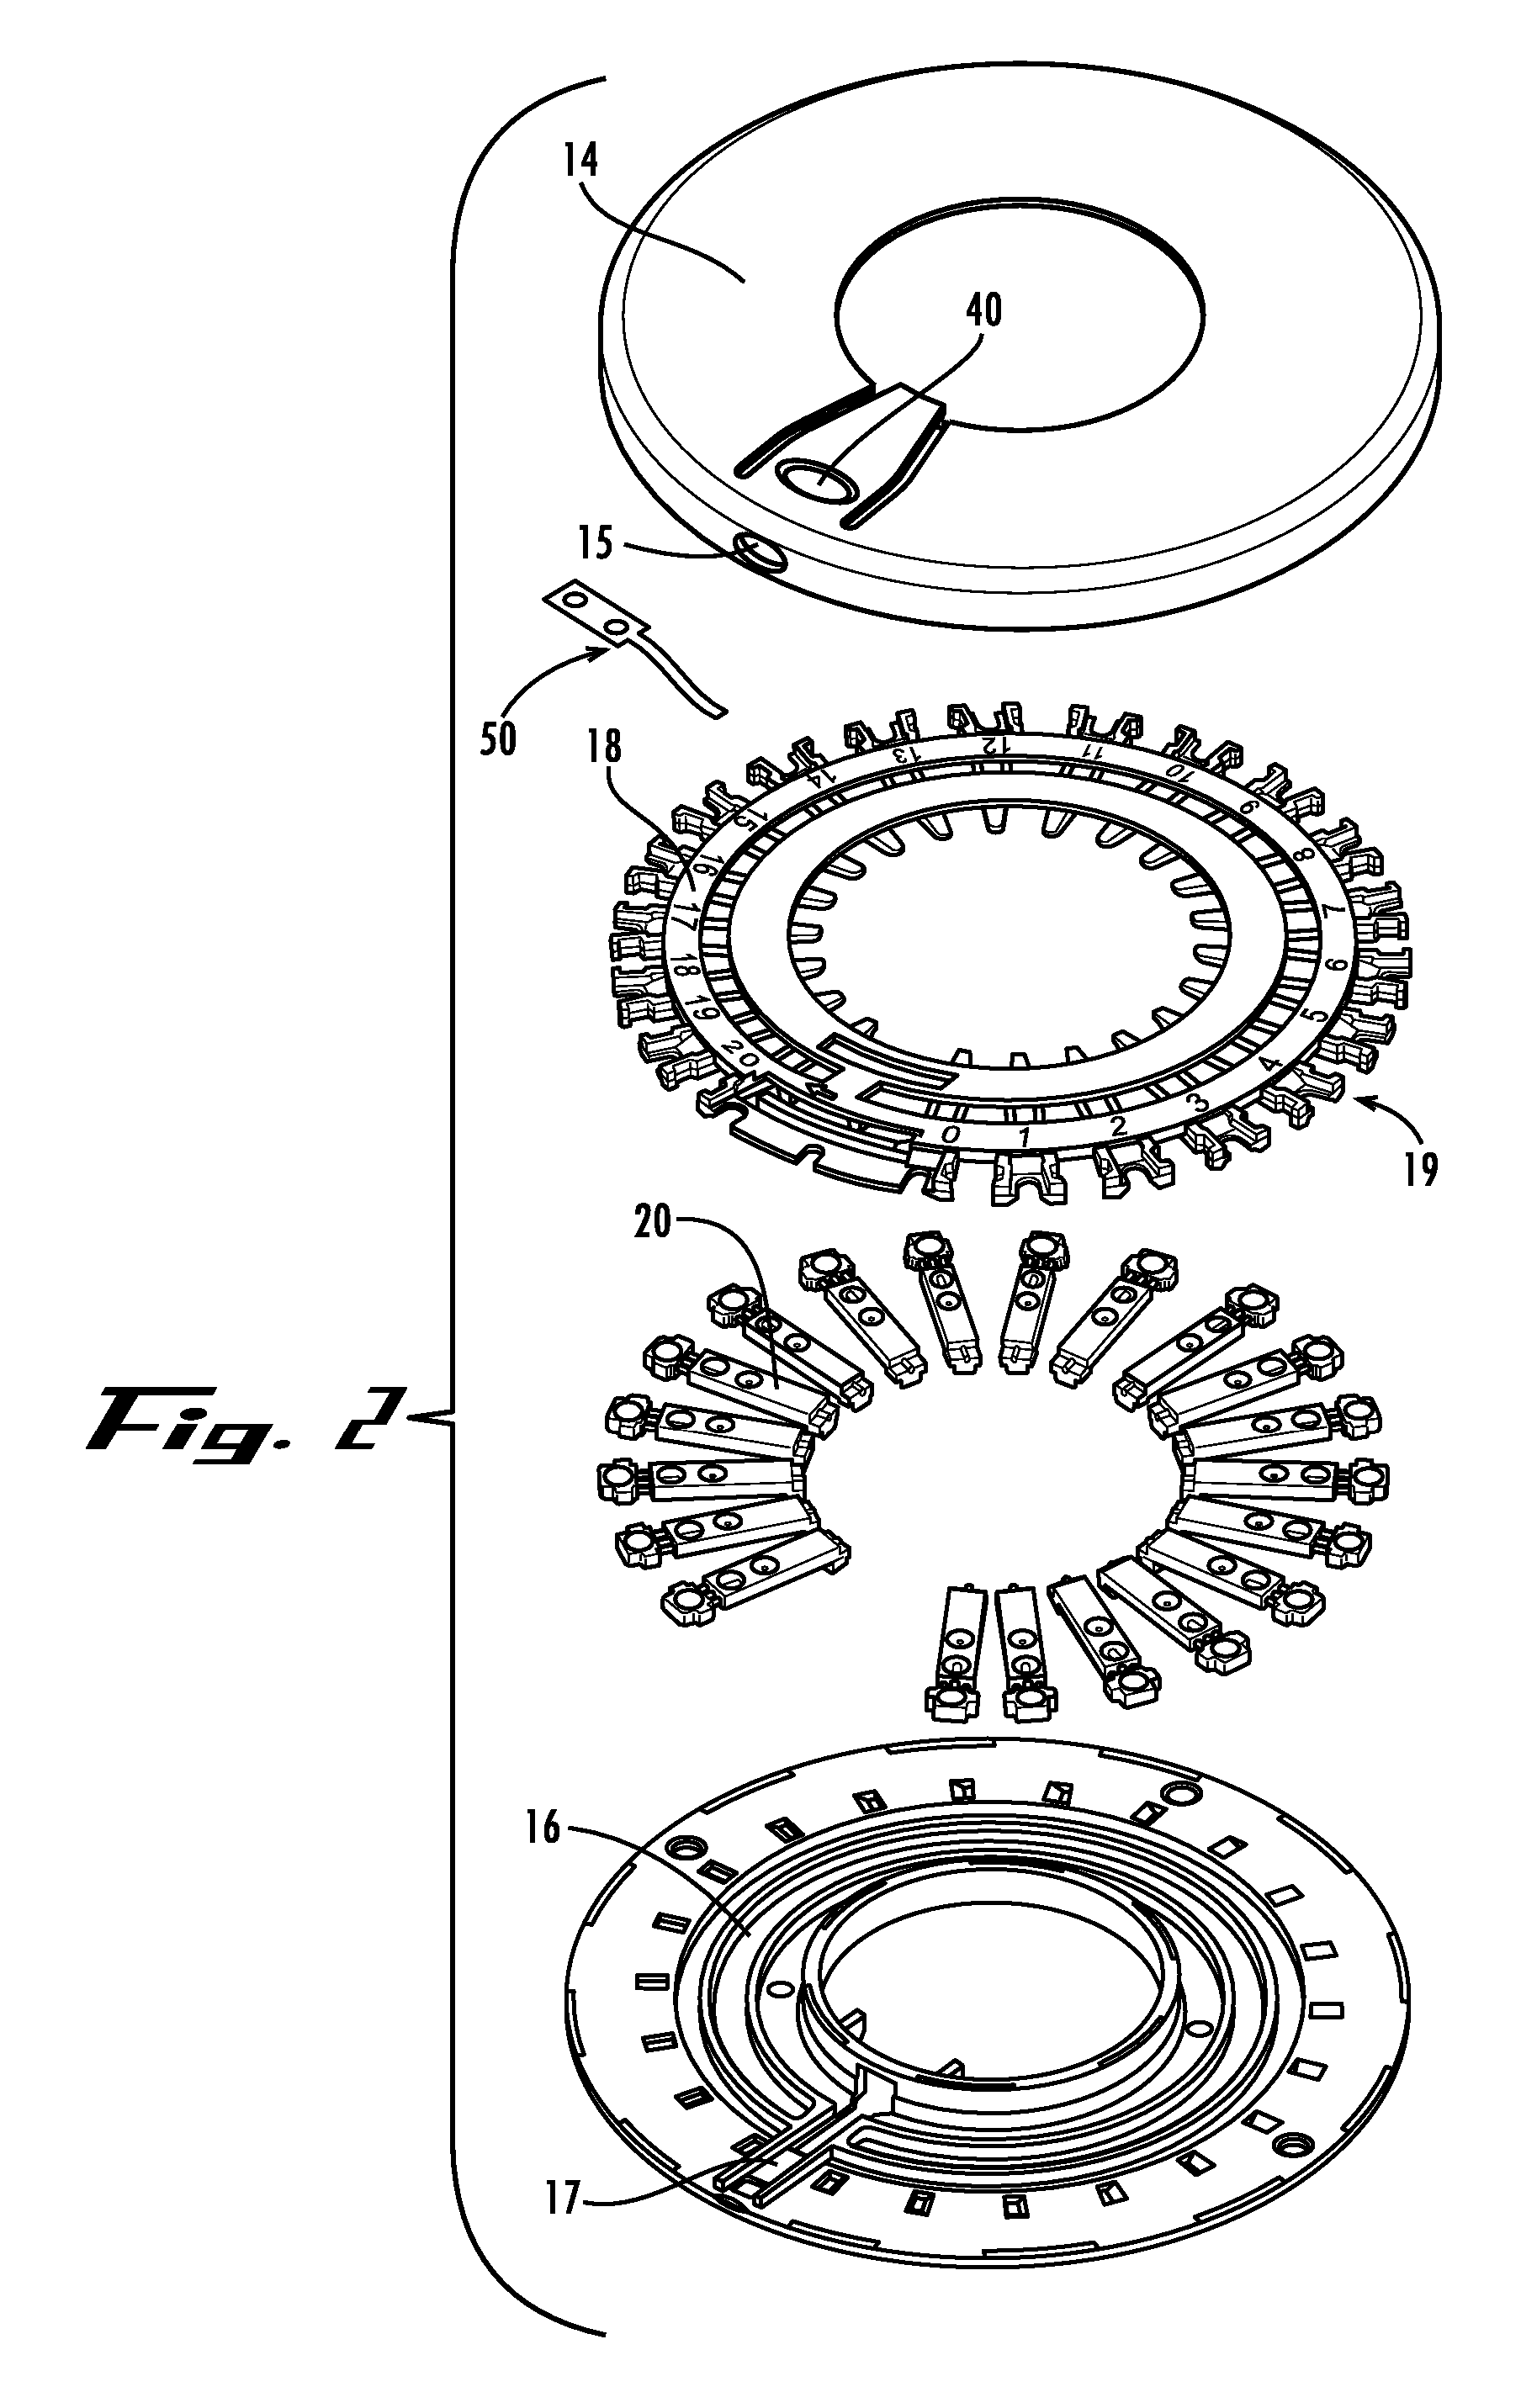 Cap displacement mechanism for lancing device and multi-lancet cartridge